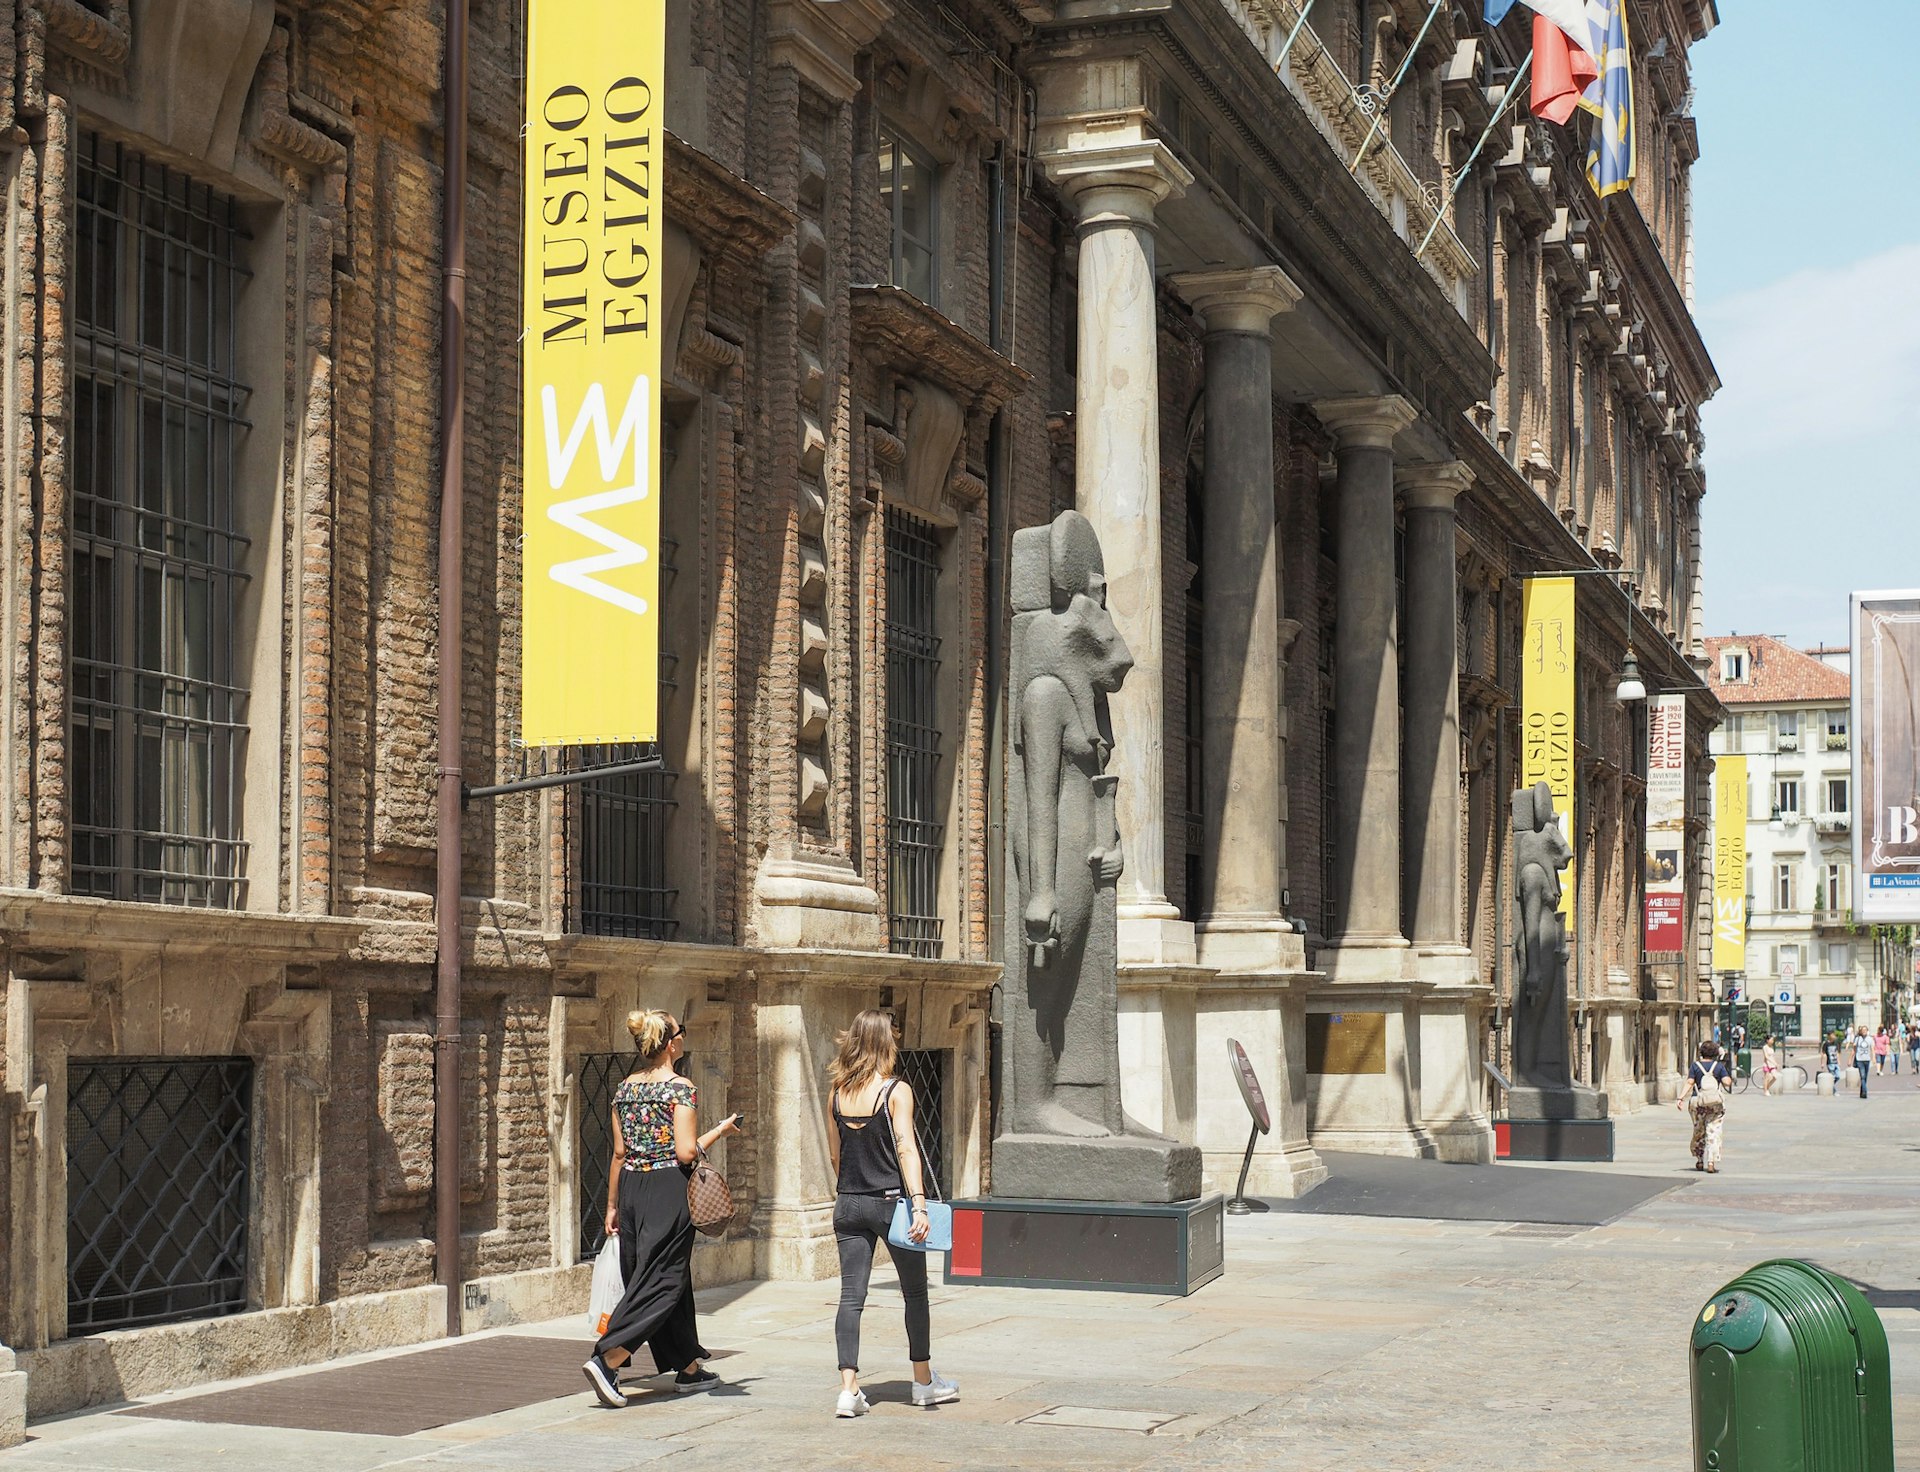 Two women walk up to the main entrance of the Museo Egizio in Turin